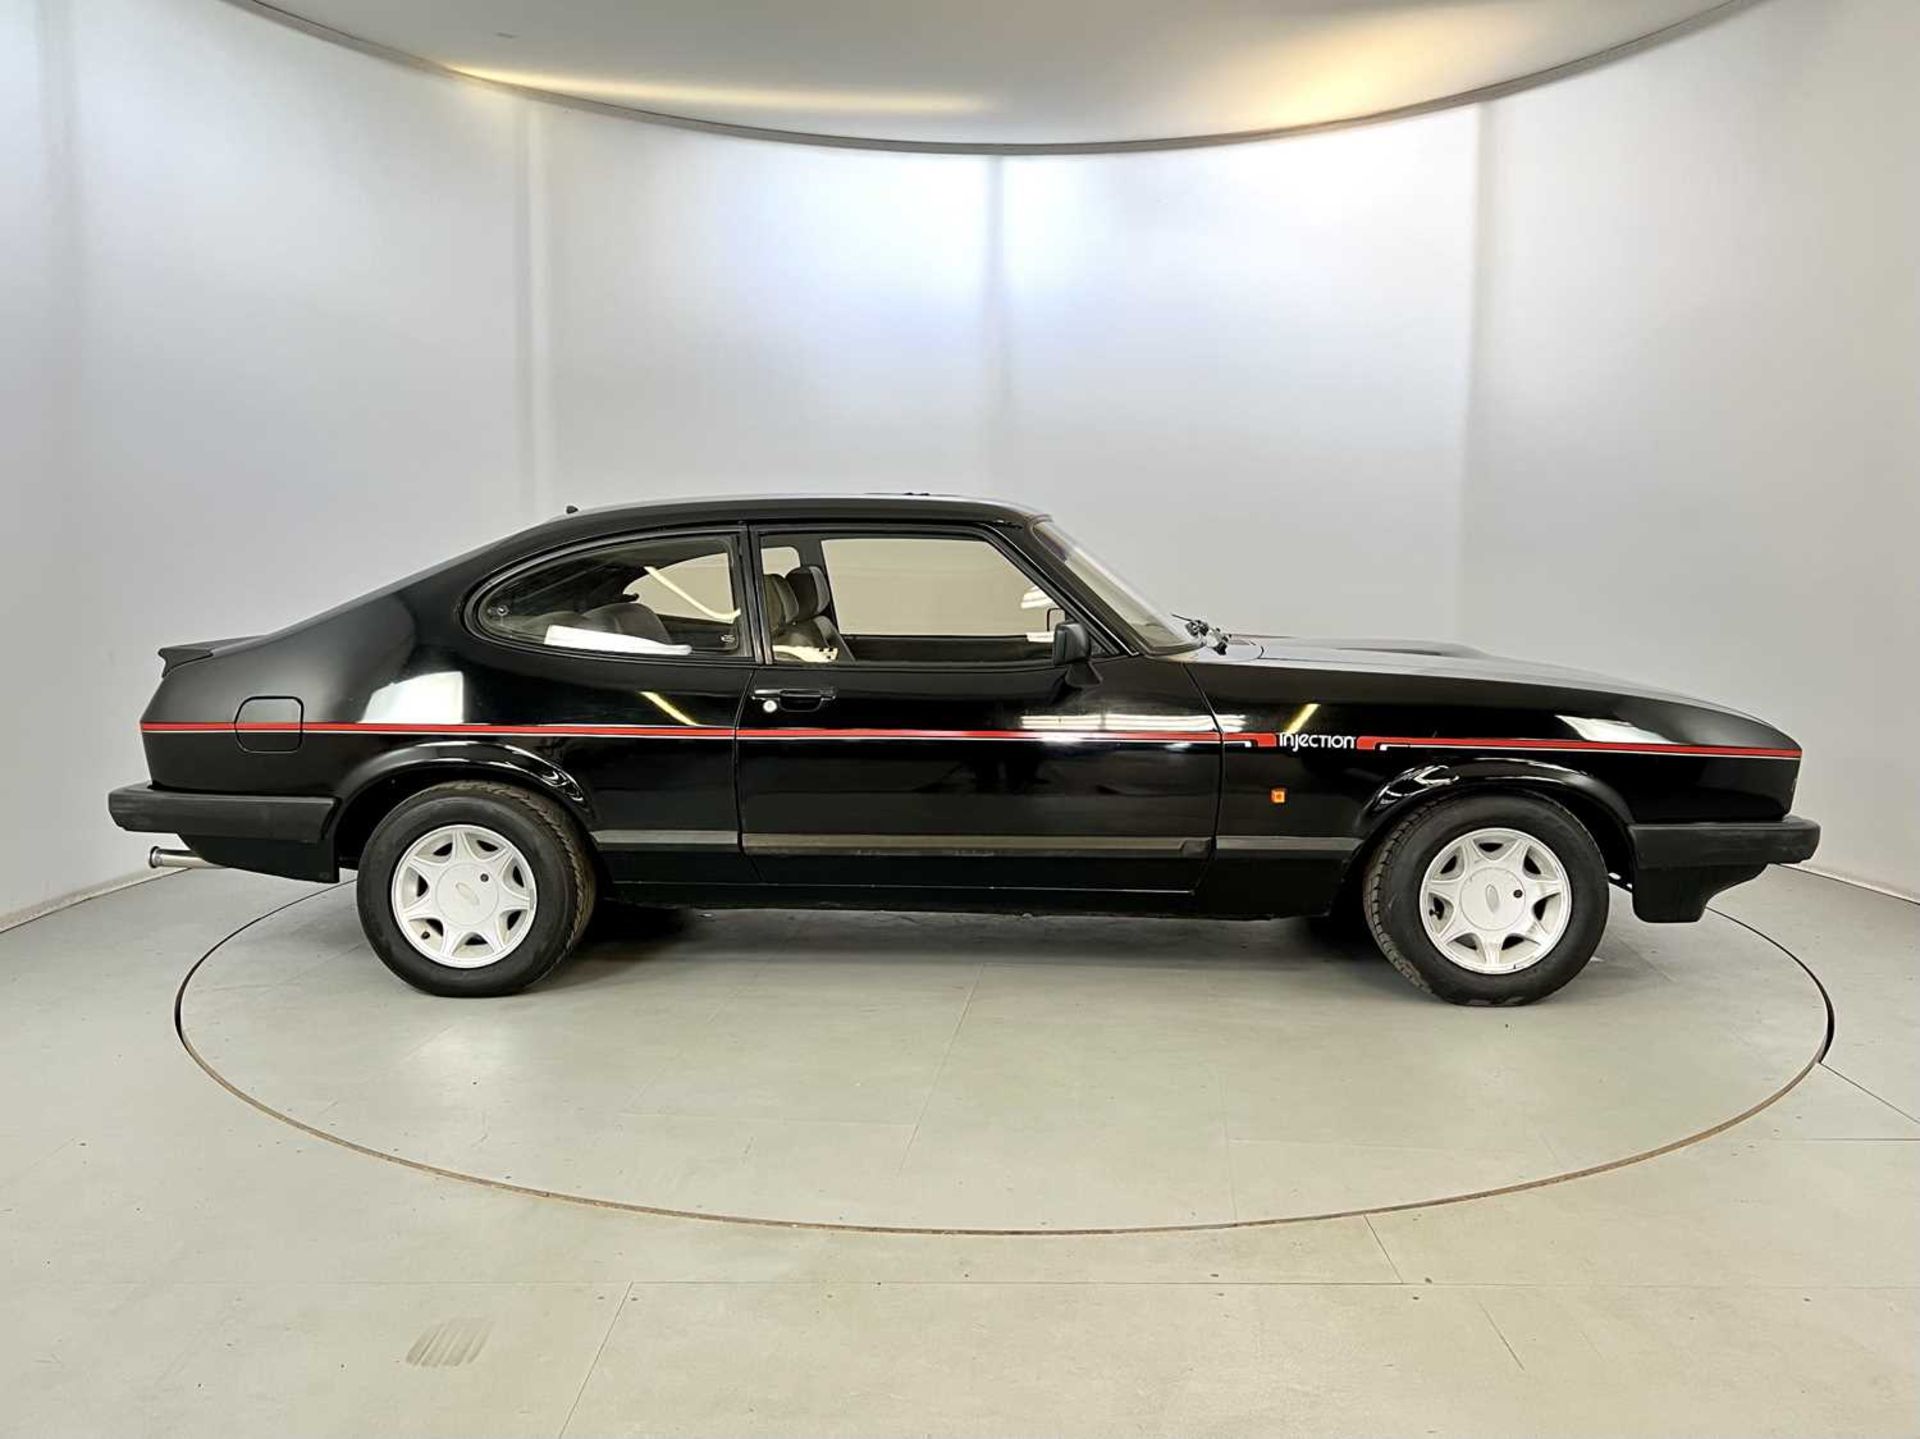 1987 Ford Capri 2.8 Injection - Image 11 of 28